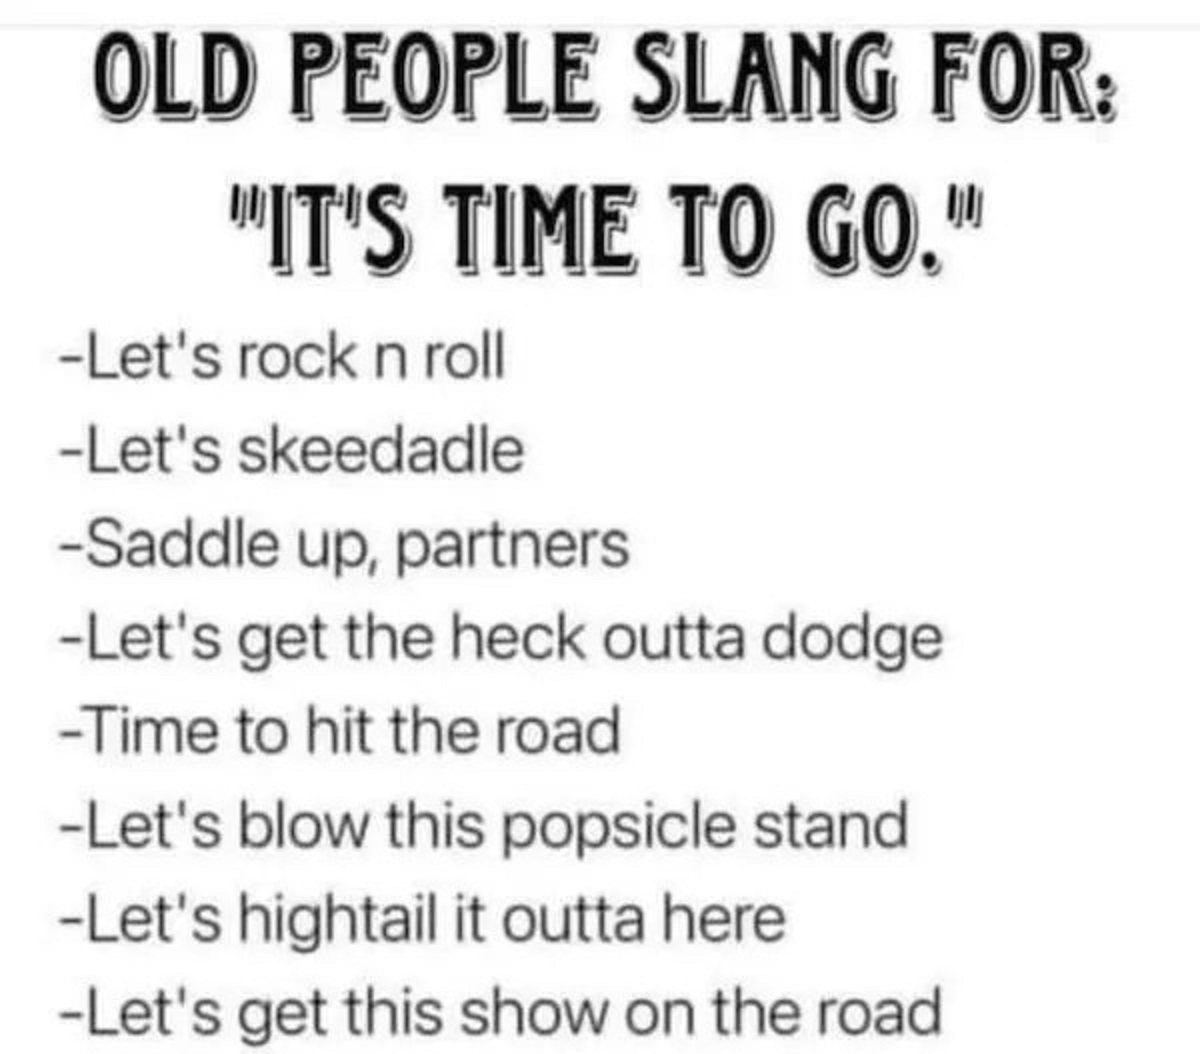 Slang - Old People Slang For "It'S Time To Go." Let's rock n roll Let's skeedadle Saddle up, partners Let's get the heck outta dodge Time to hit the road Let's blow this popsicle stand Let's hightail it outta here Let's get this show on the road